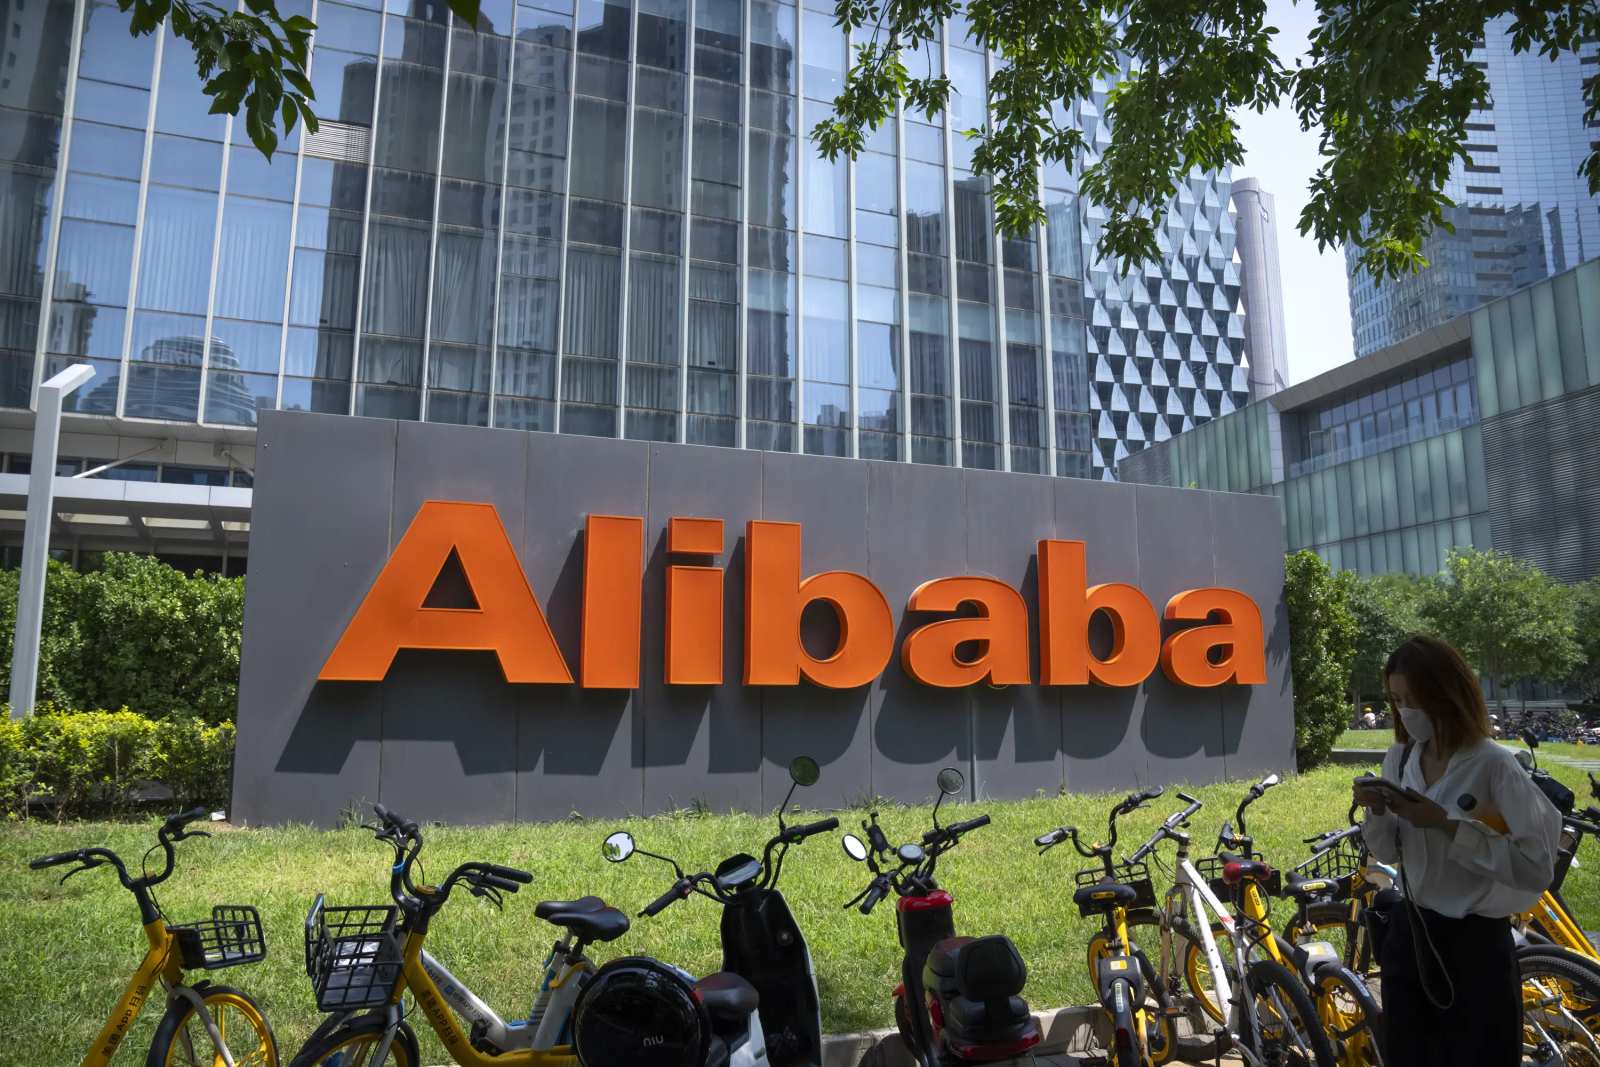 Alibaba is facing the reduction of holdings by the giant Softbank: an analysis of development difficulties and cooperation prospects